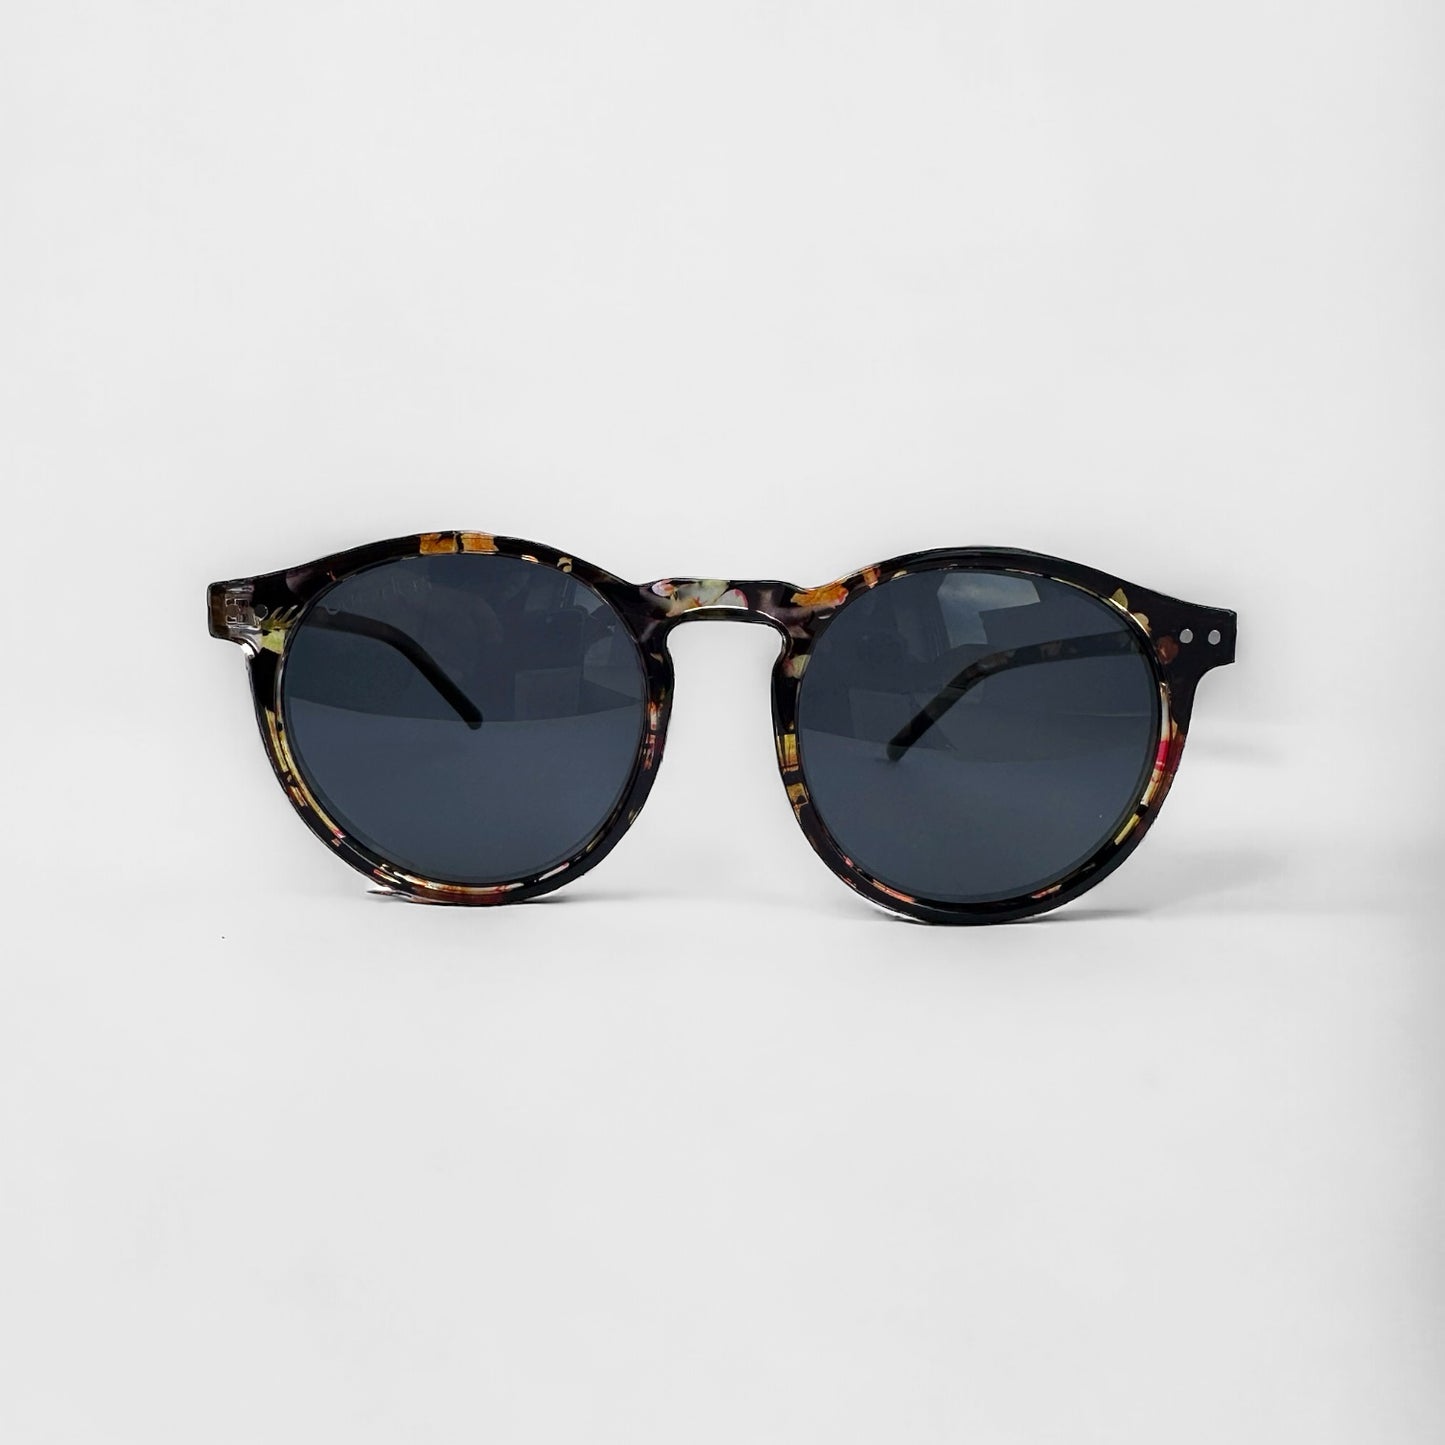 Outsiders Deck Sunglasses - Floral